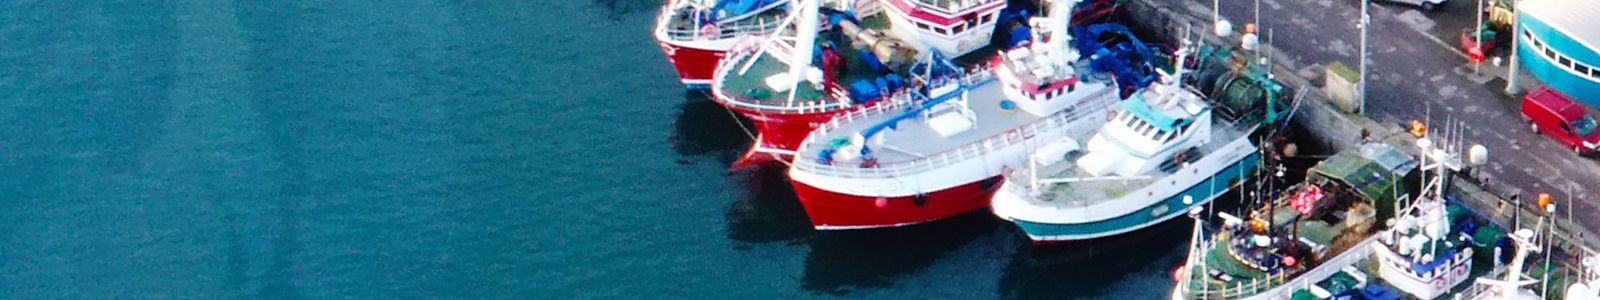 aerial photograph of fishing vessels berthed at pier